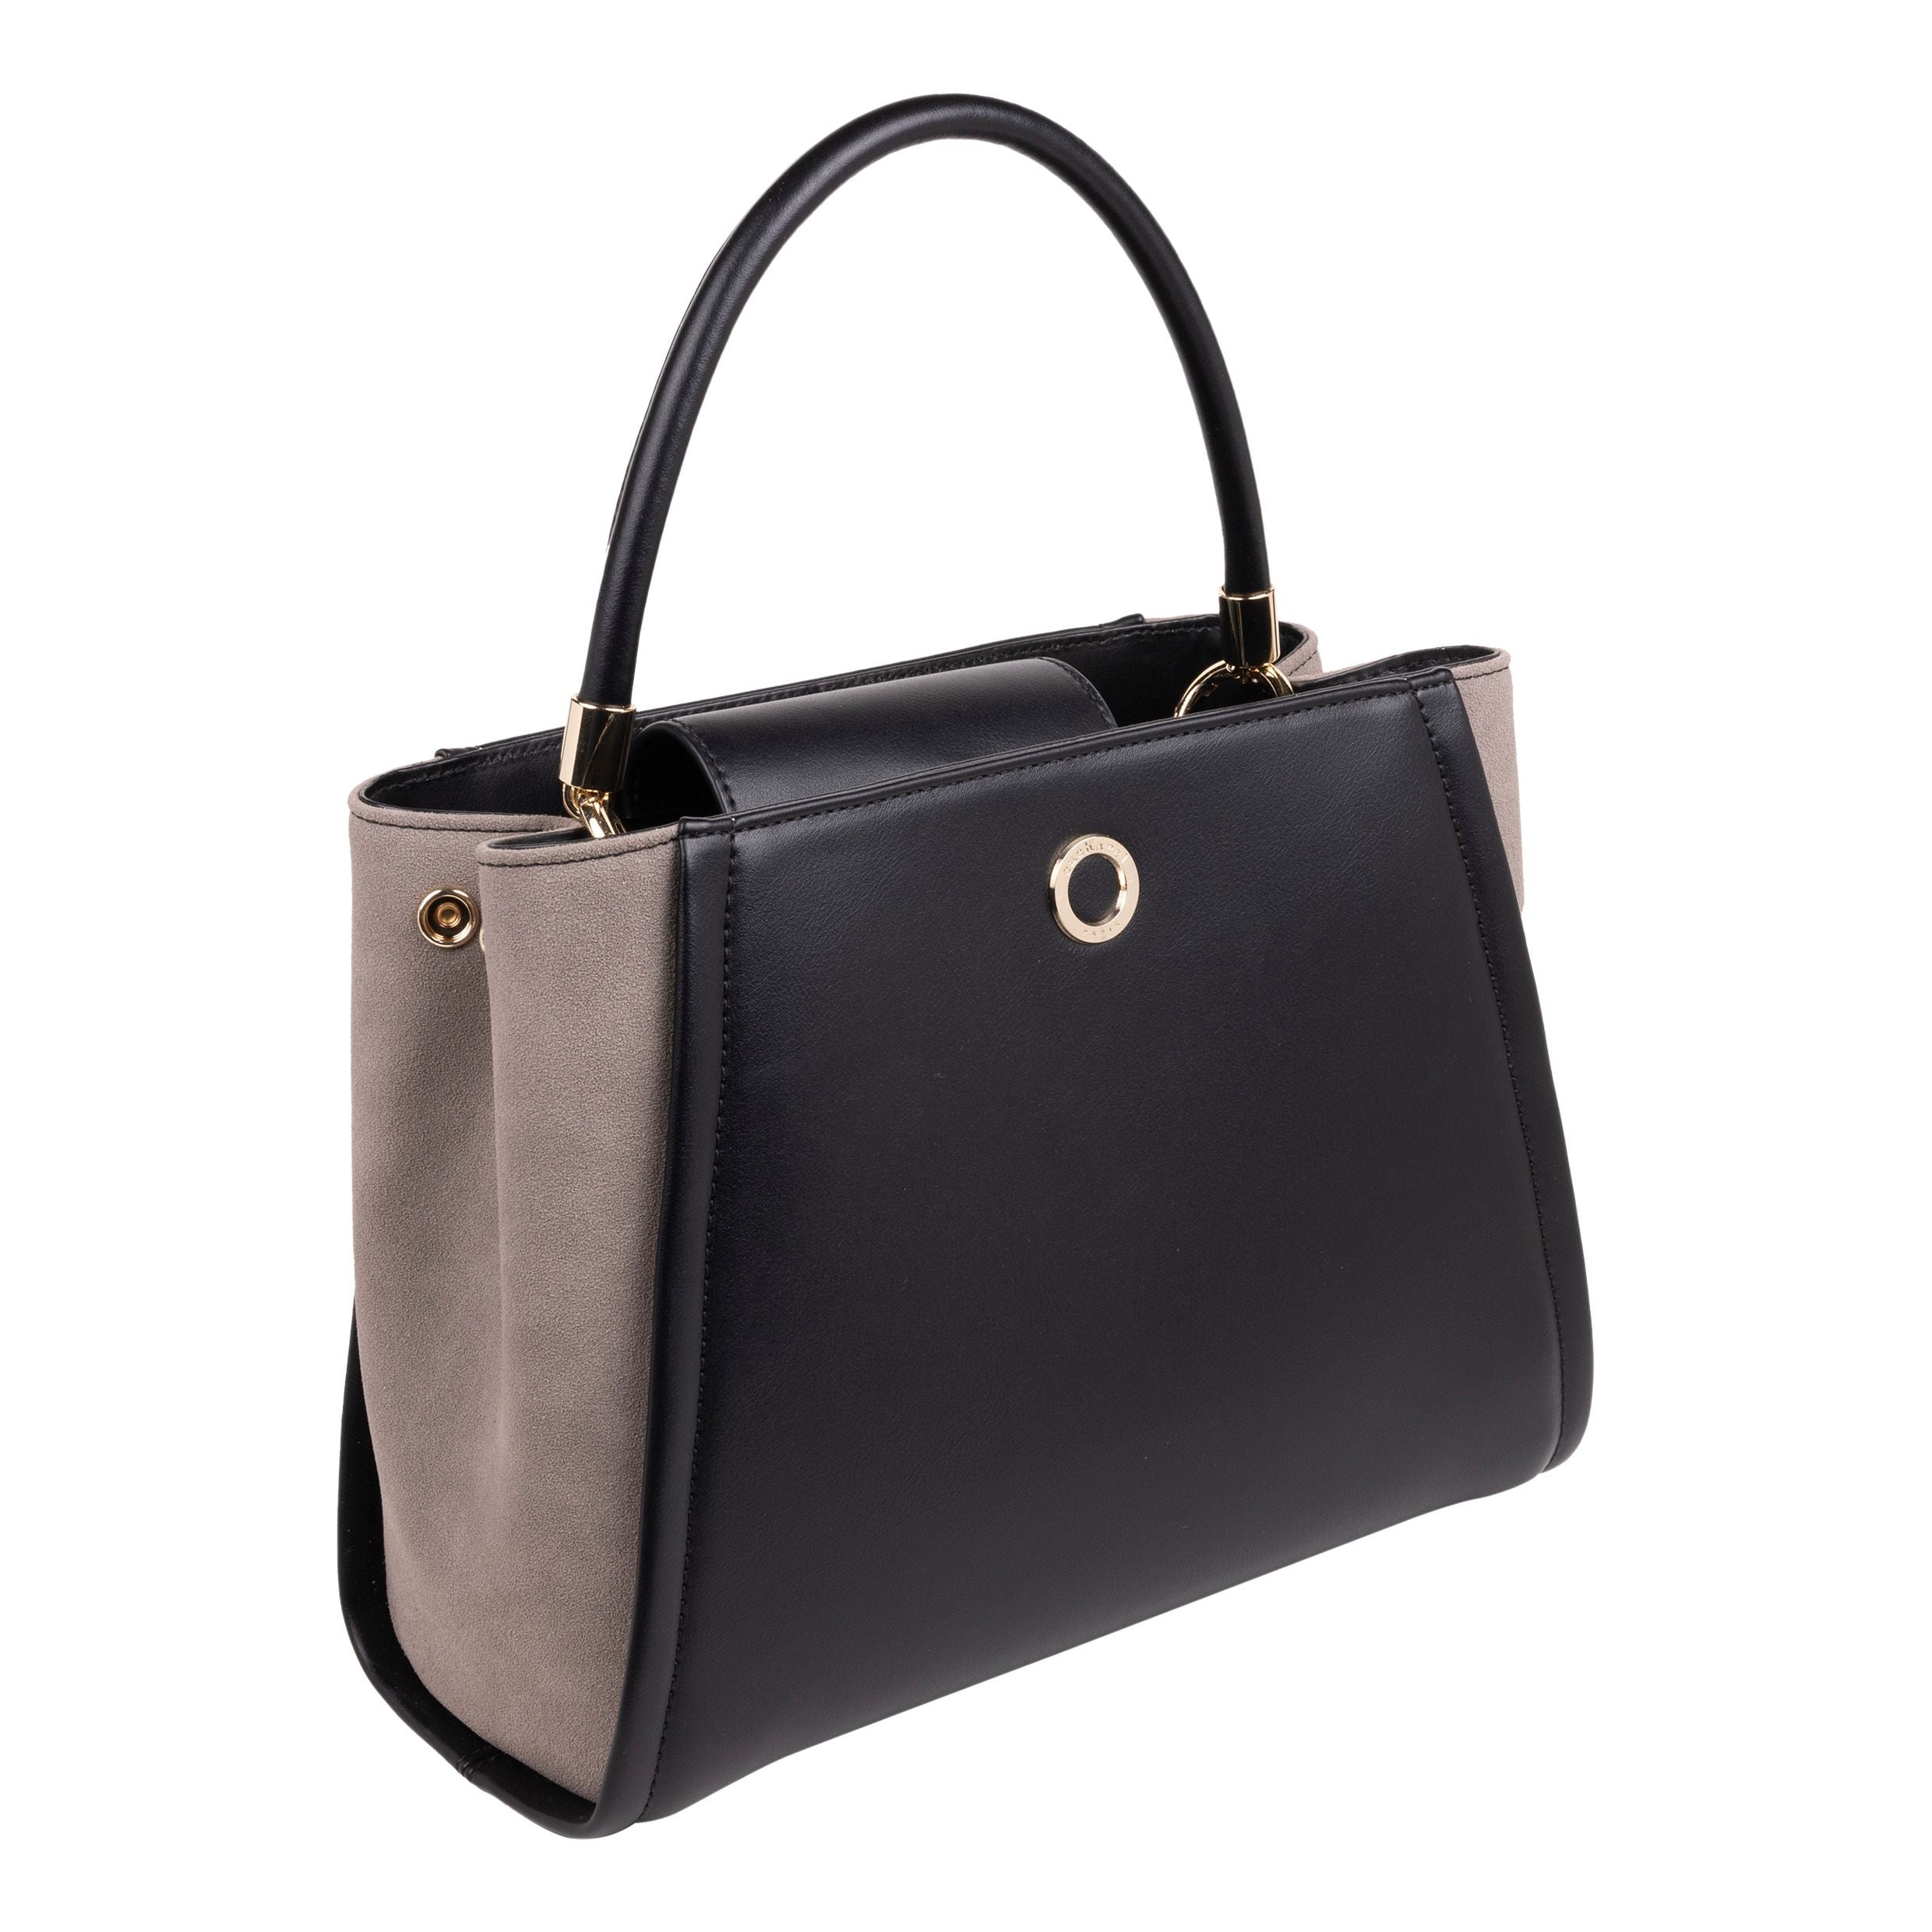 Lady bag in taupe Garance from Cacharel corporate gifts in HK